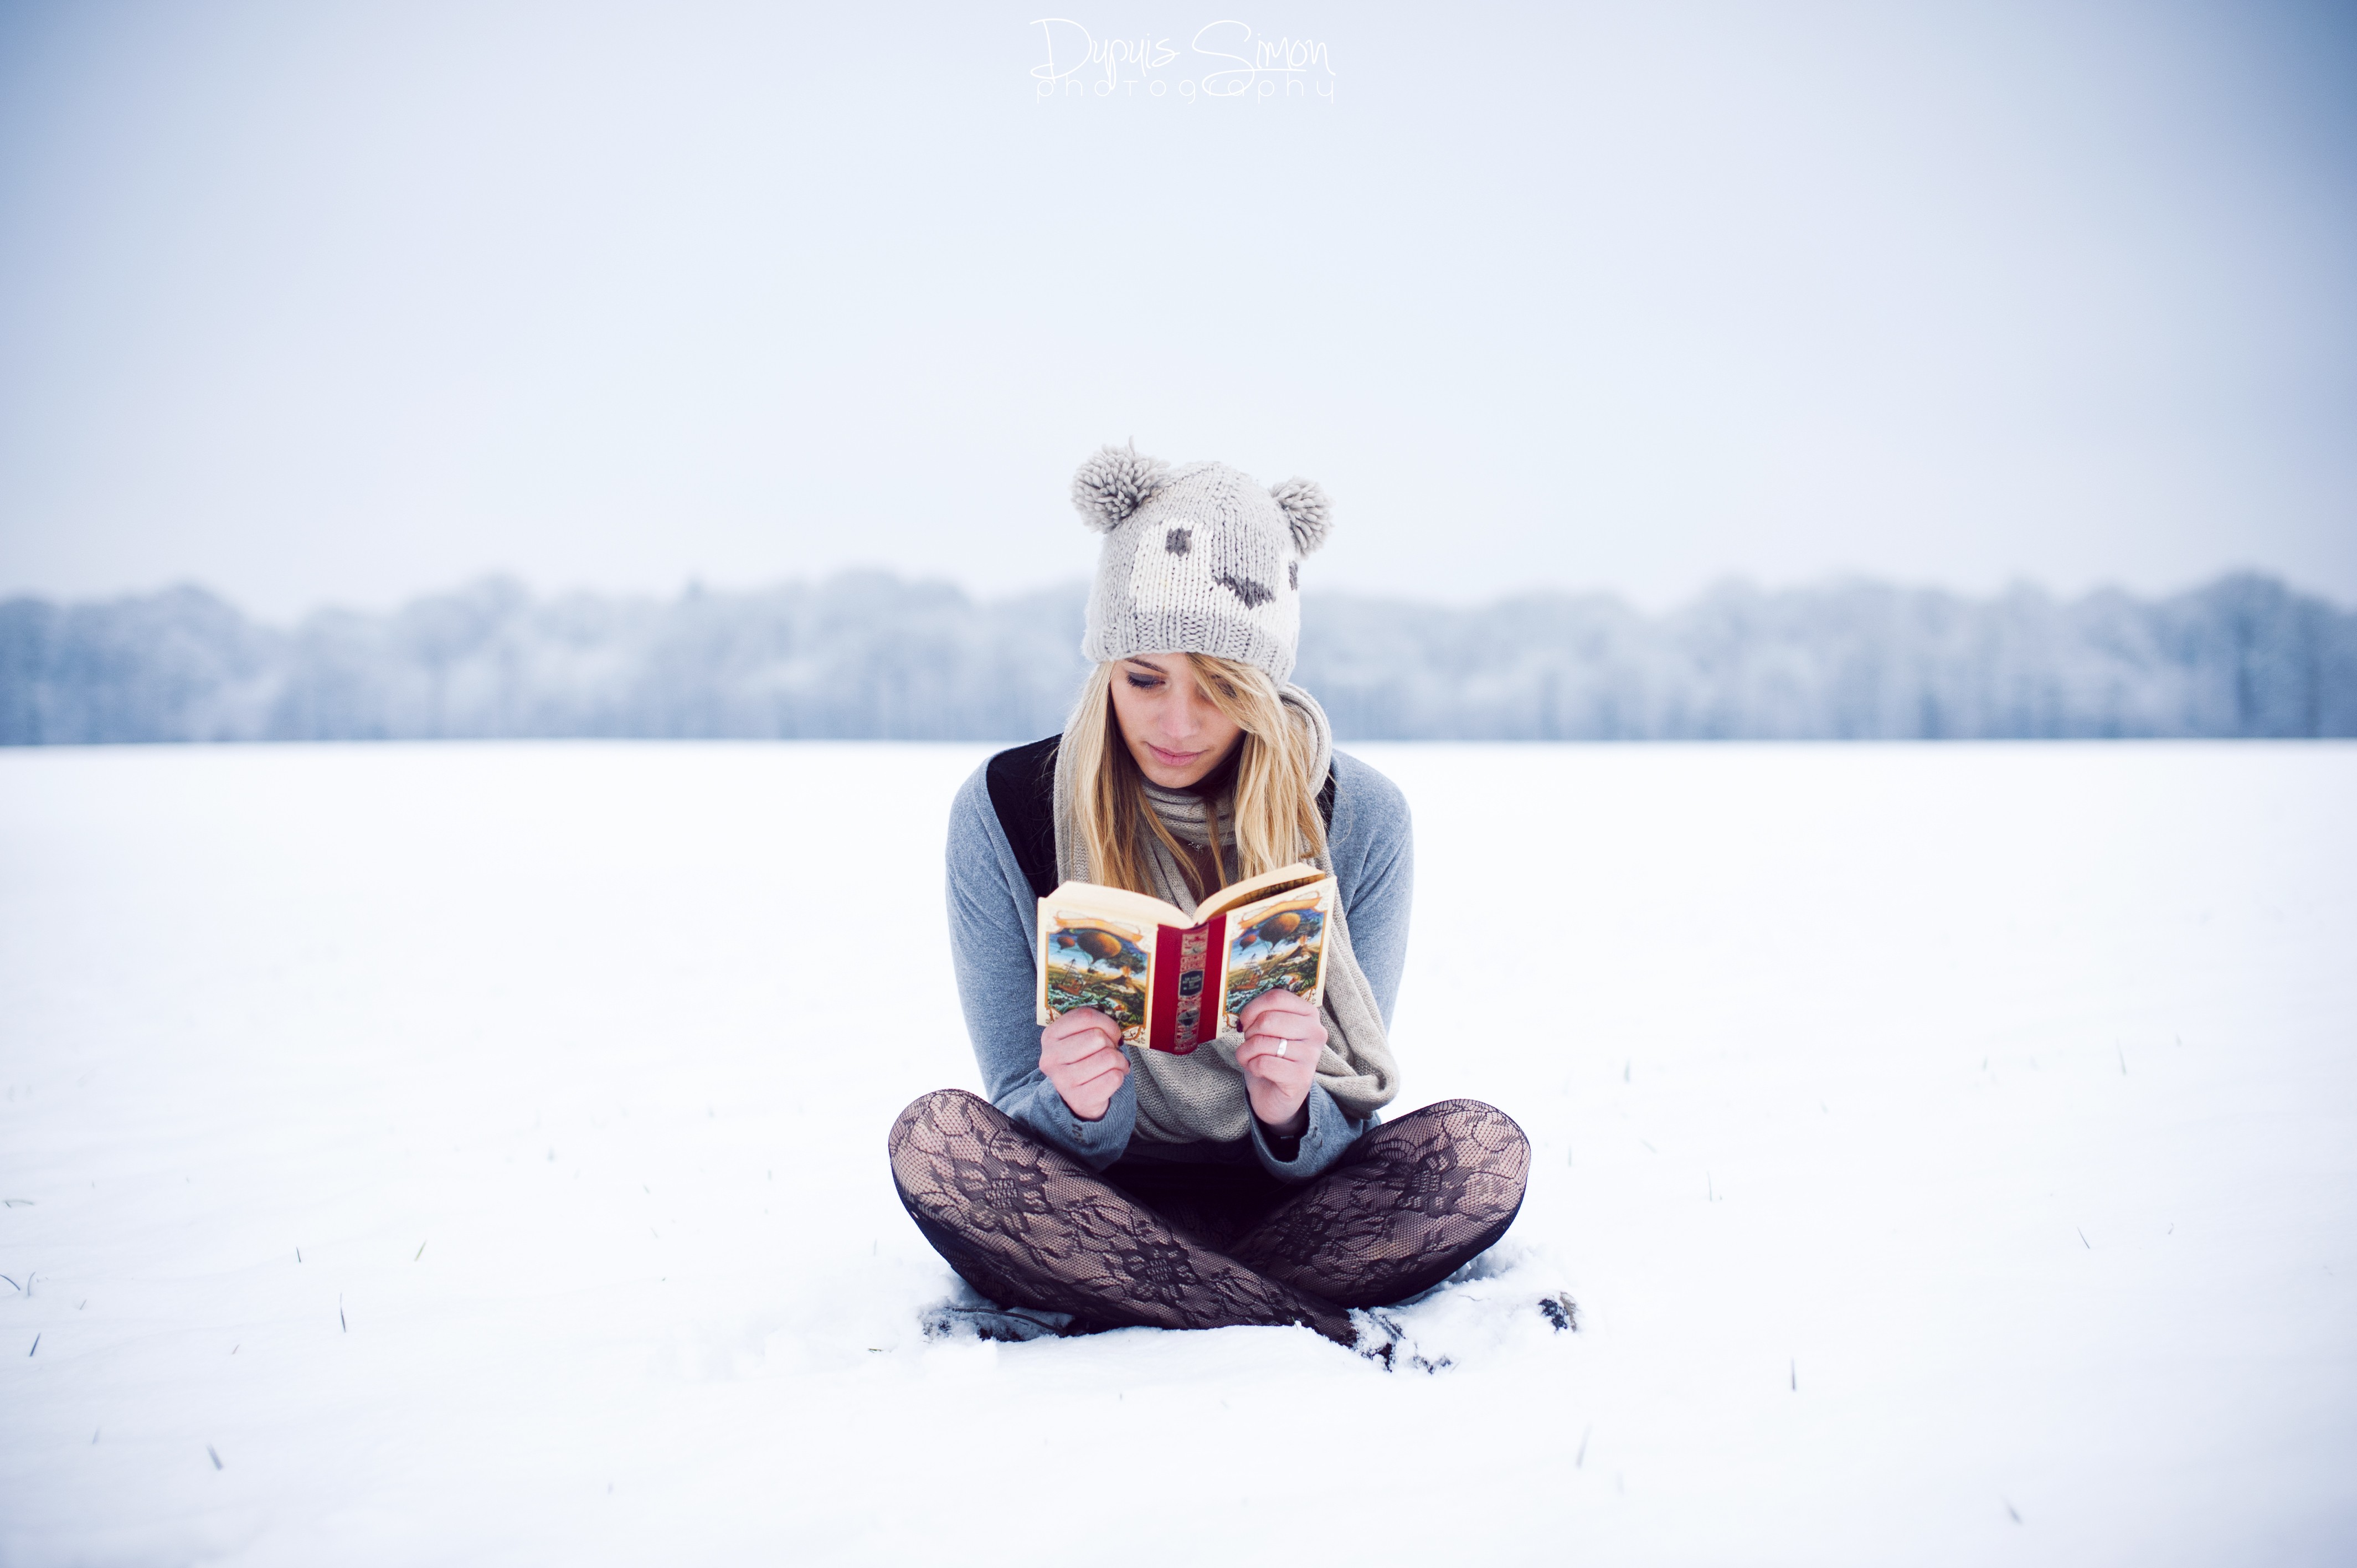 People 4256x2832 women winter women outdoors pantyhose sitting blonde long hair women with hats reading books cold ice outdoors legs crossed wool cap hat landscape